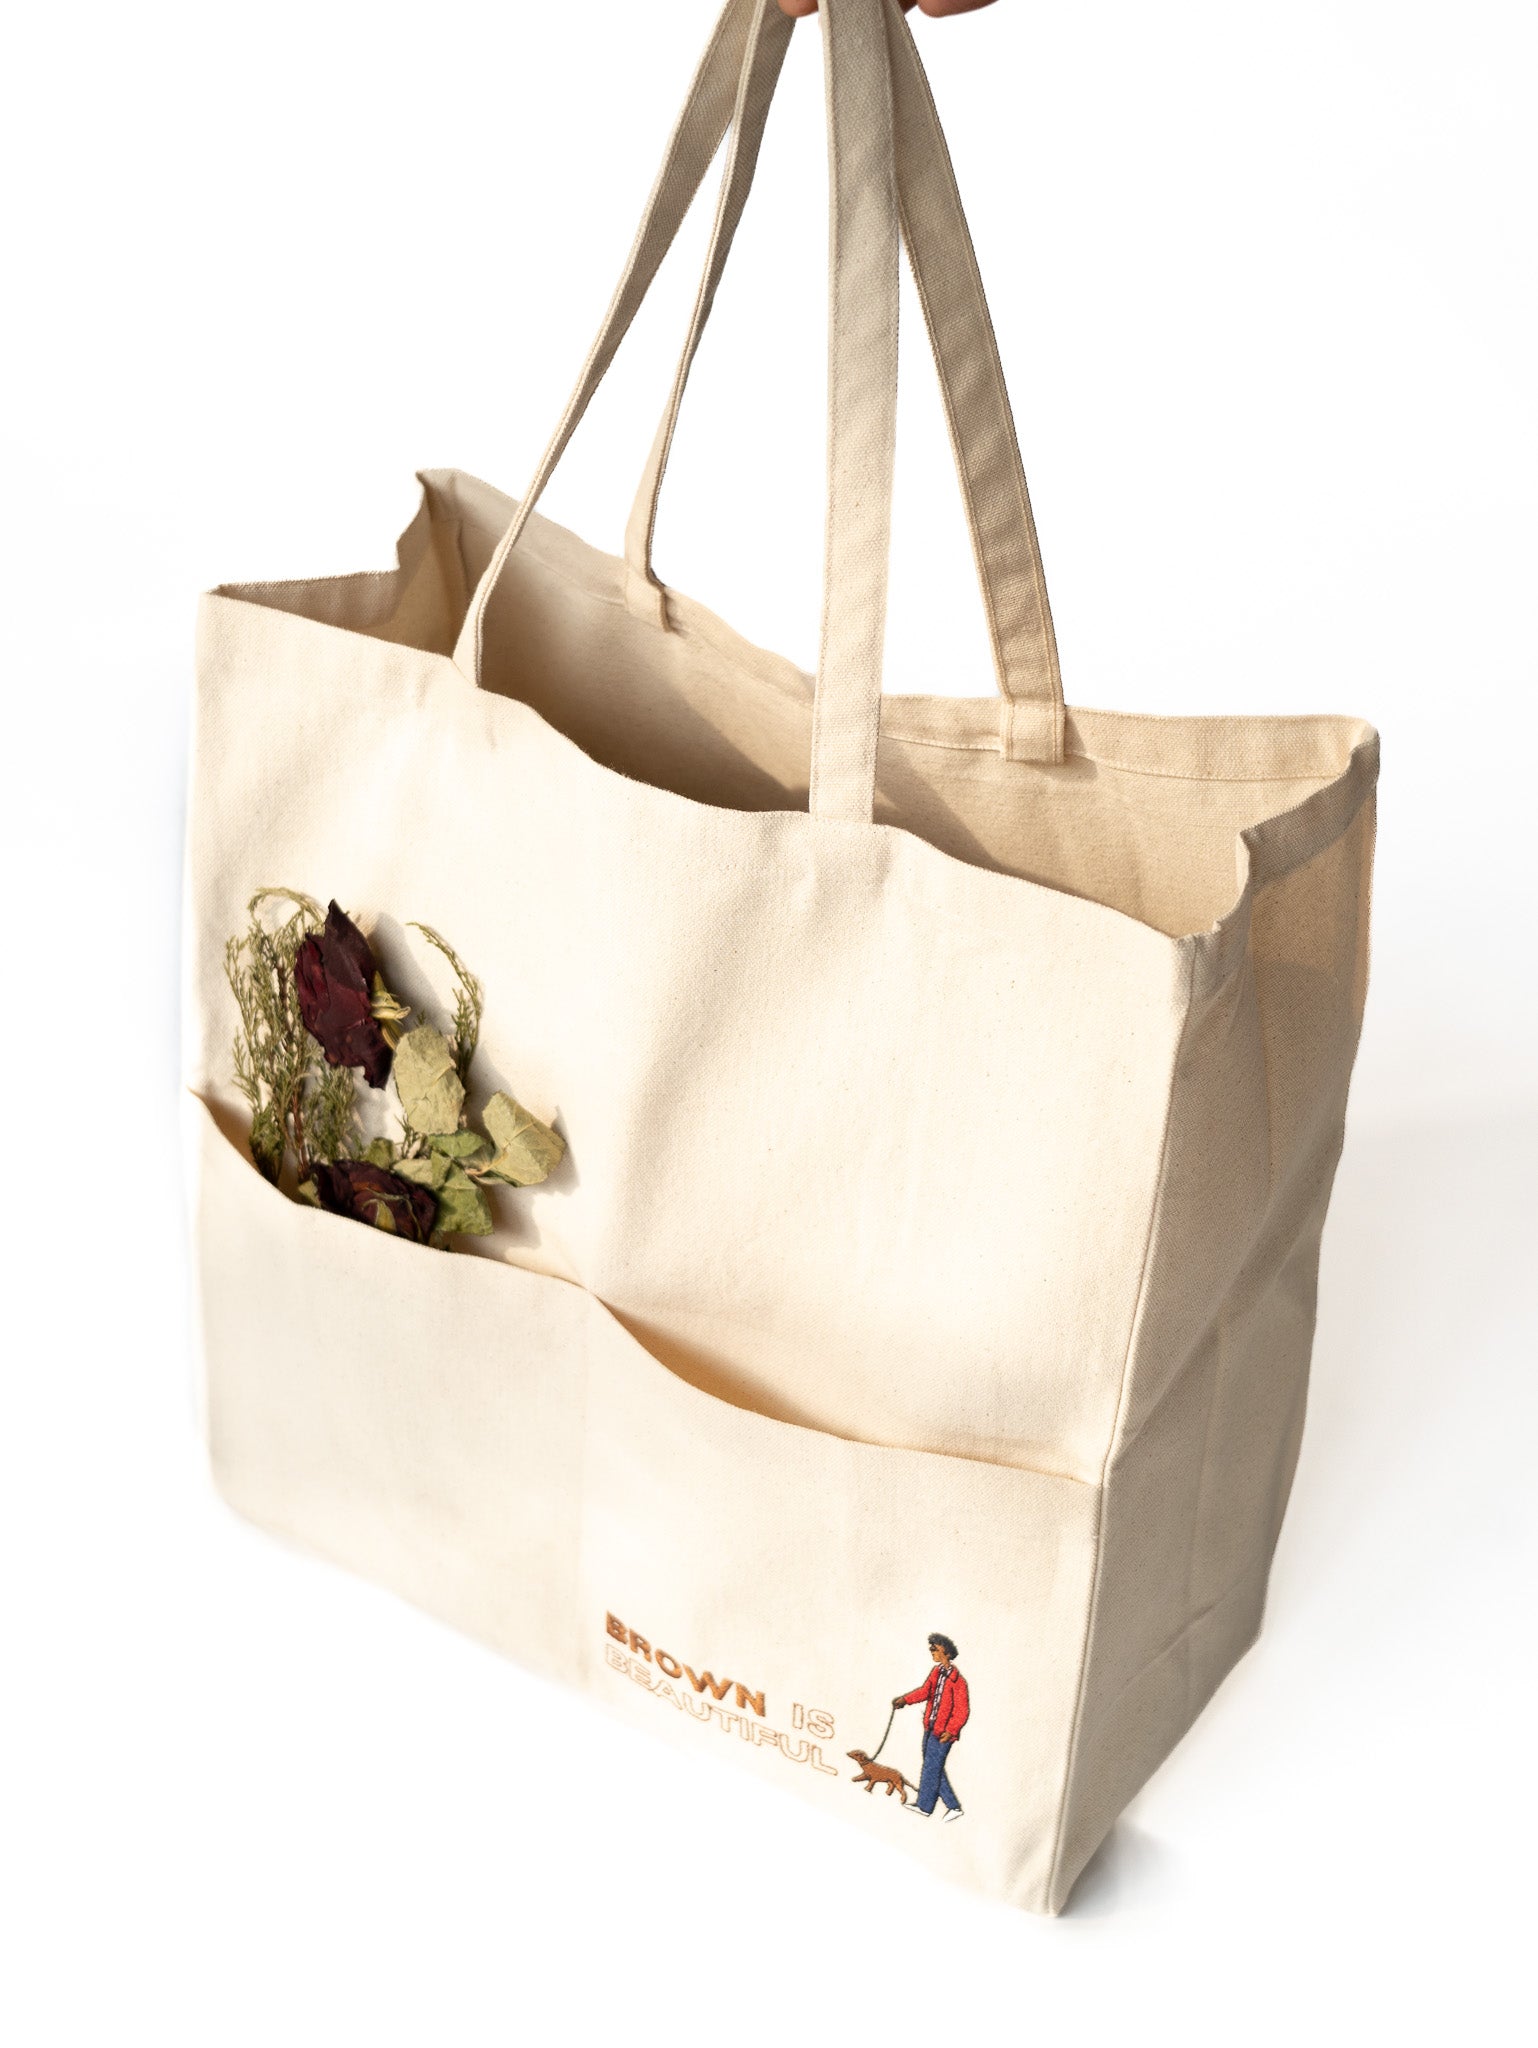 Mr. Brown with brown is beautiful text Off white Tote Bag